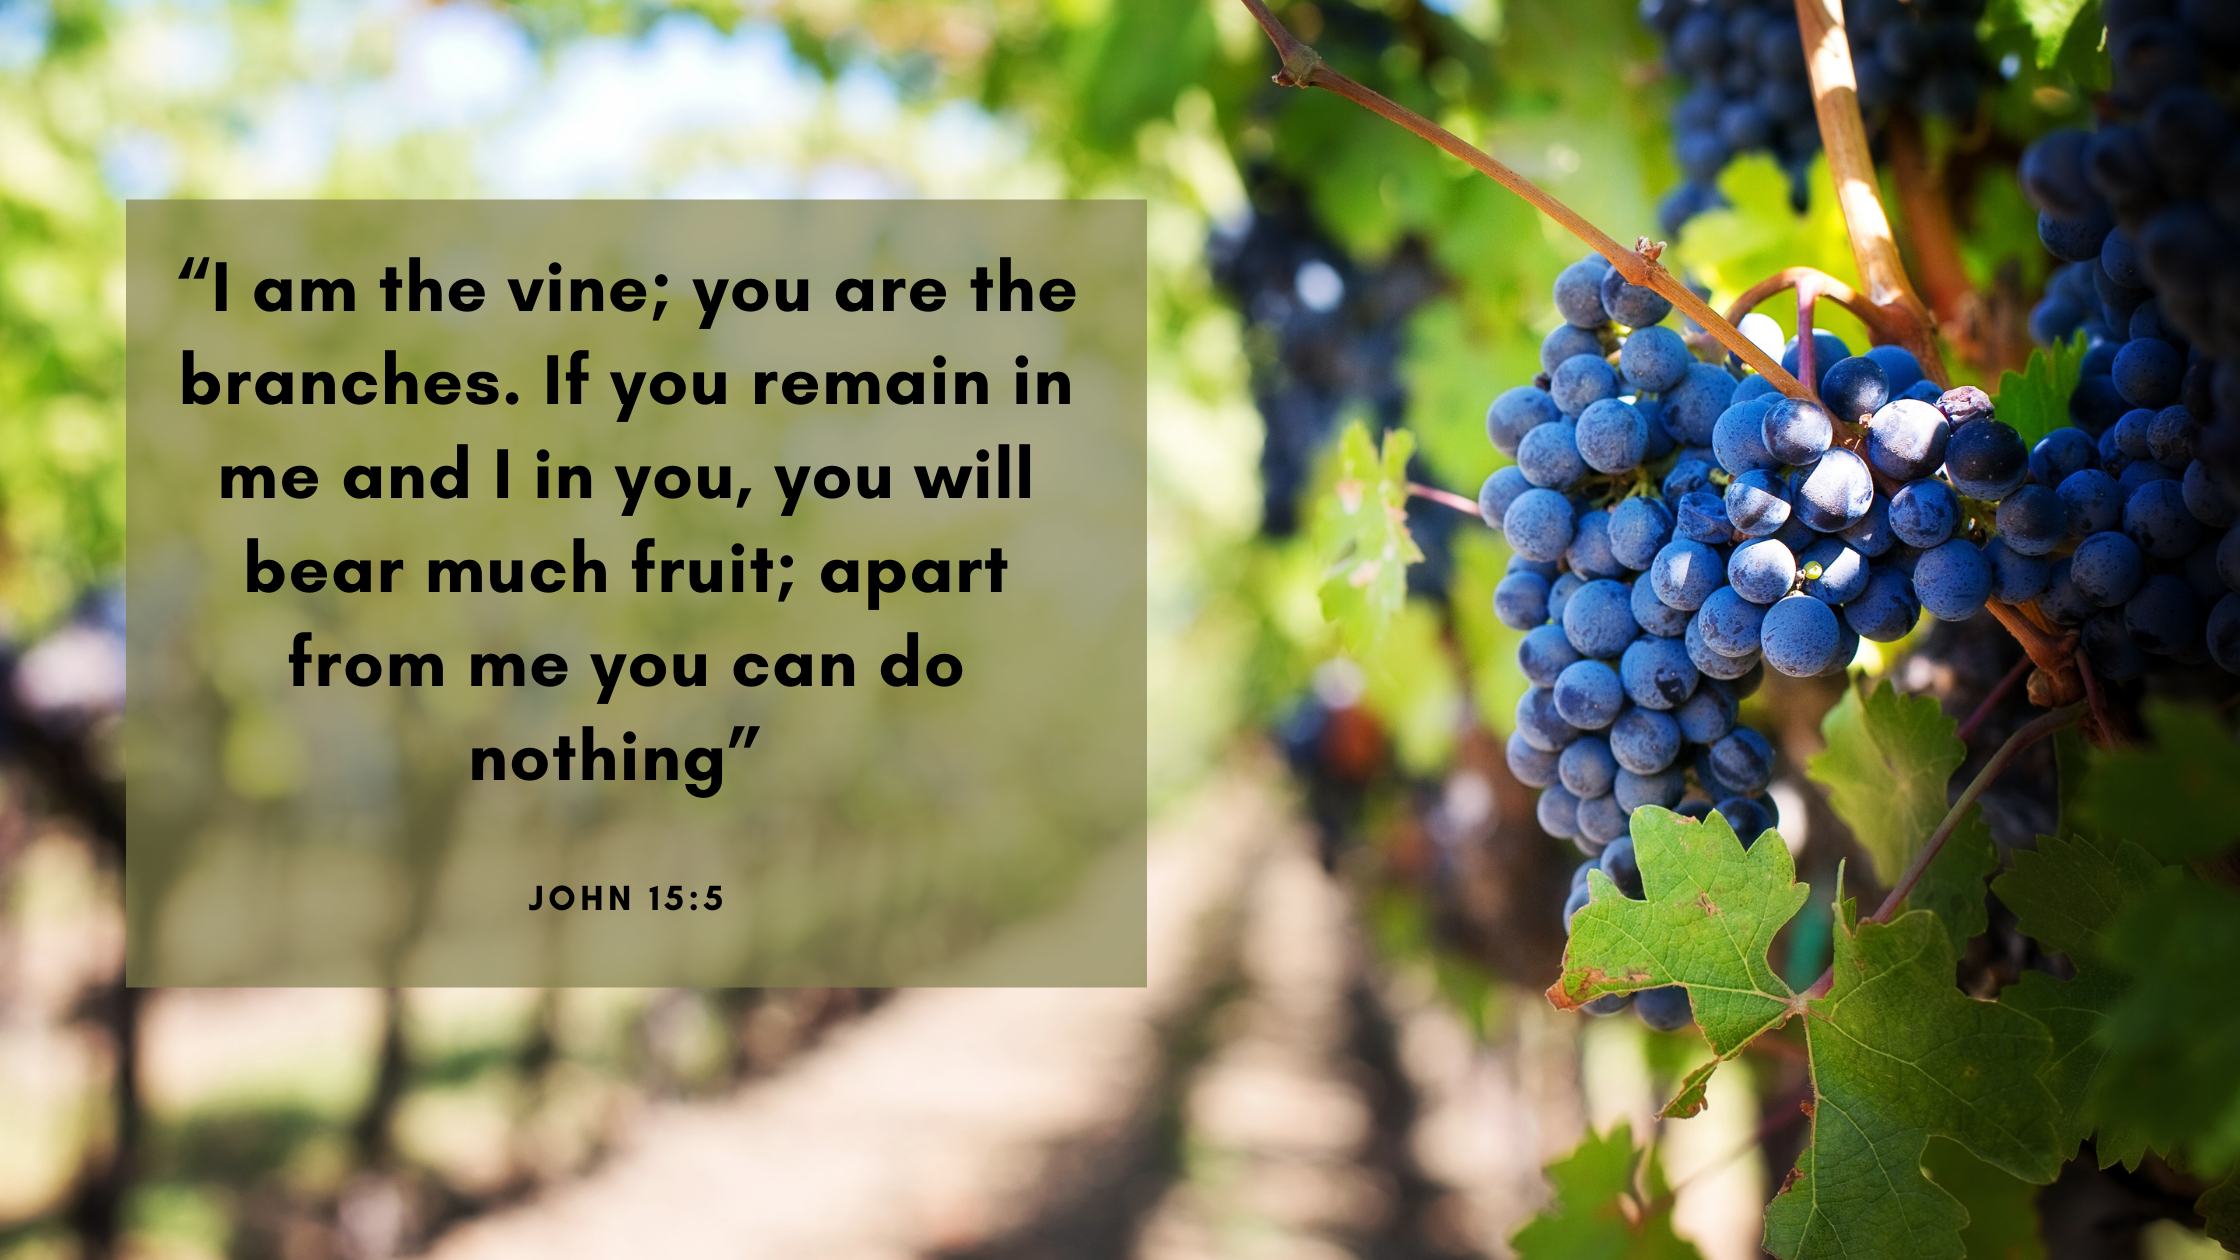 “I am the vine; you are the branches. If you remain in me and I in you, you will bear much fruit; apart from me you can do nothing” (John 155)